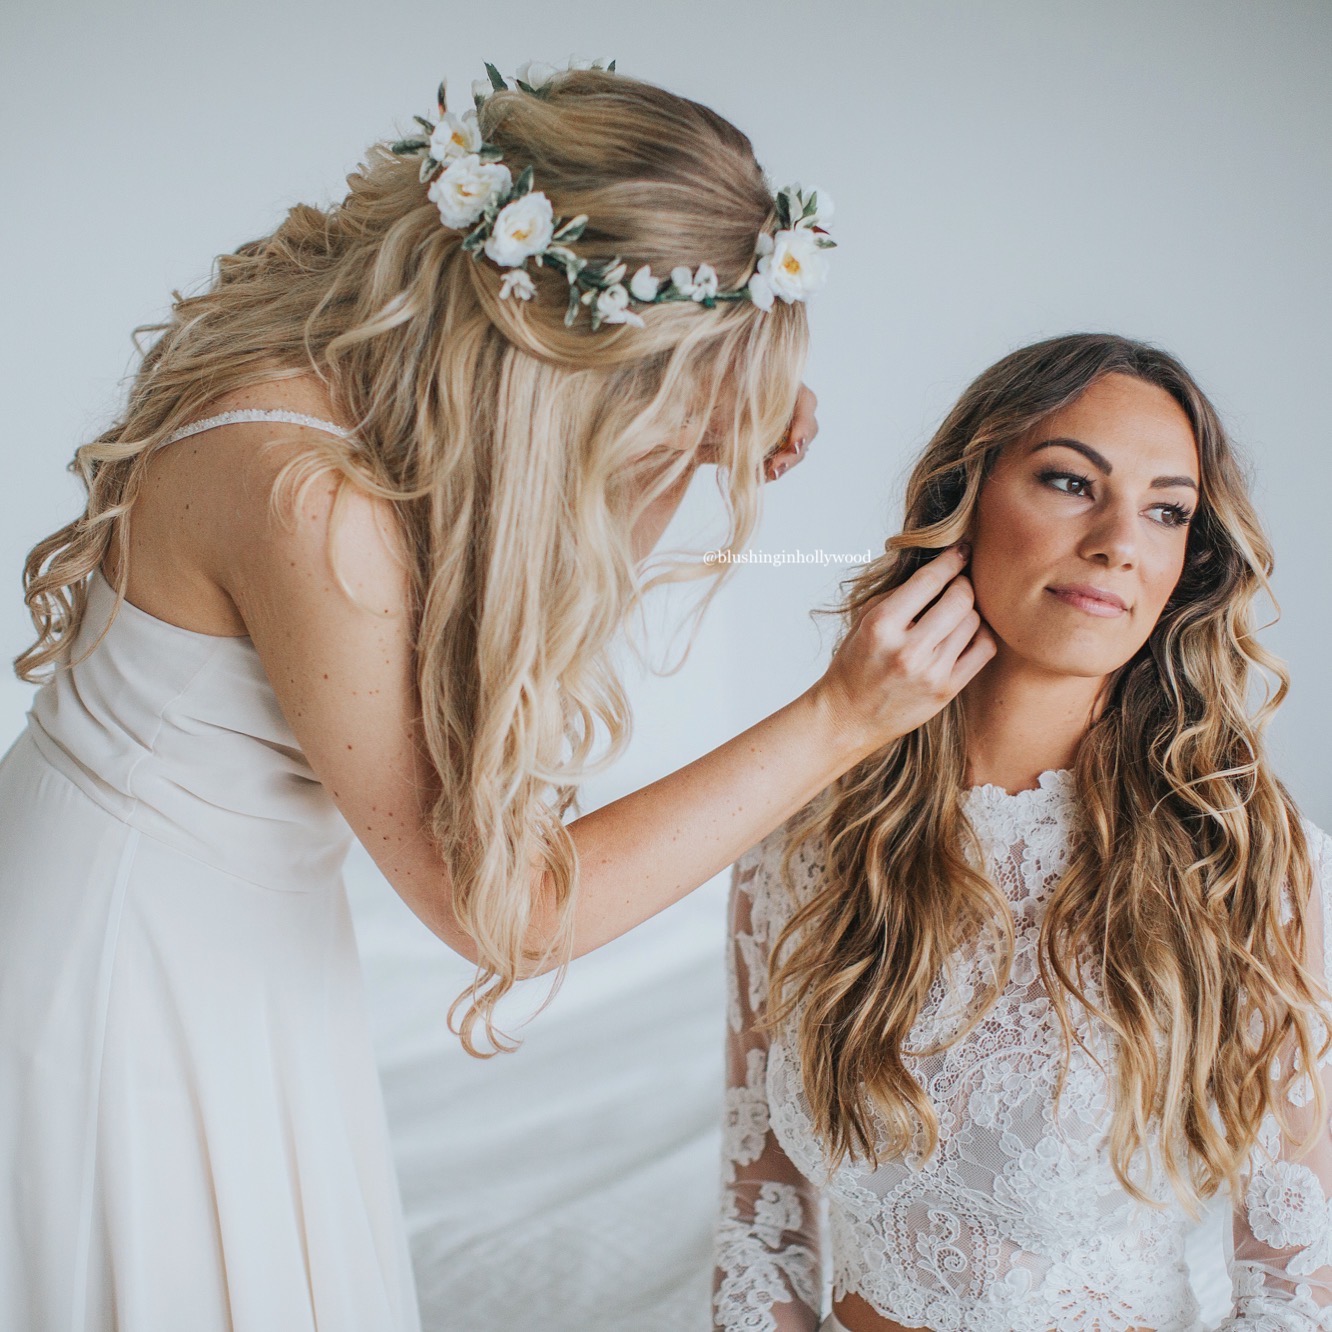 Long loose blonde waves wedding hair inspo with flower crown - Blushing in  Hollywood